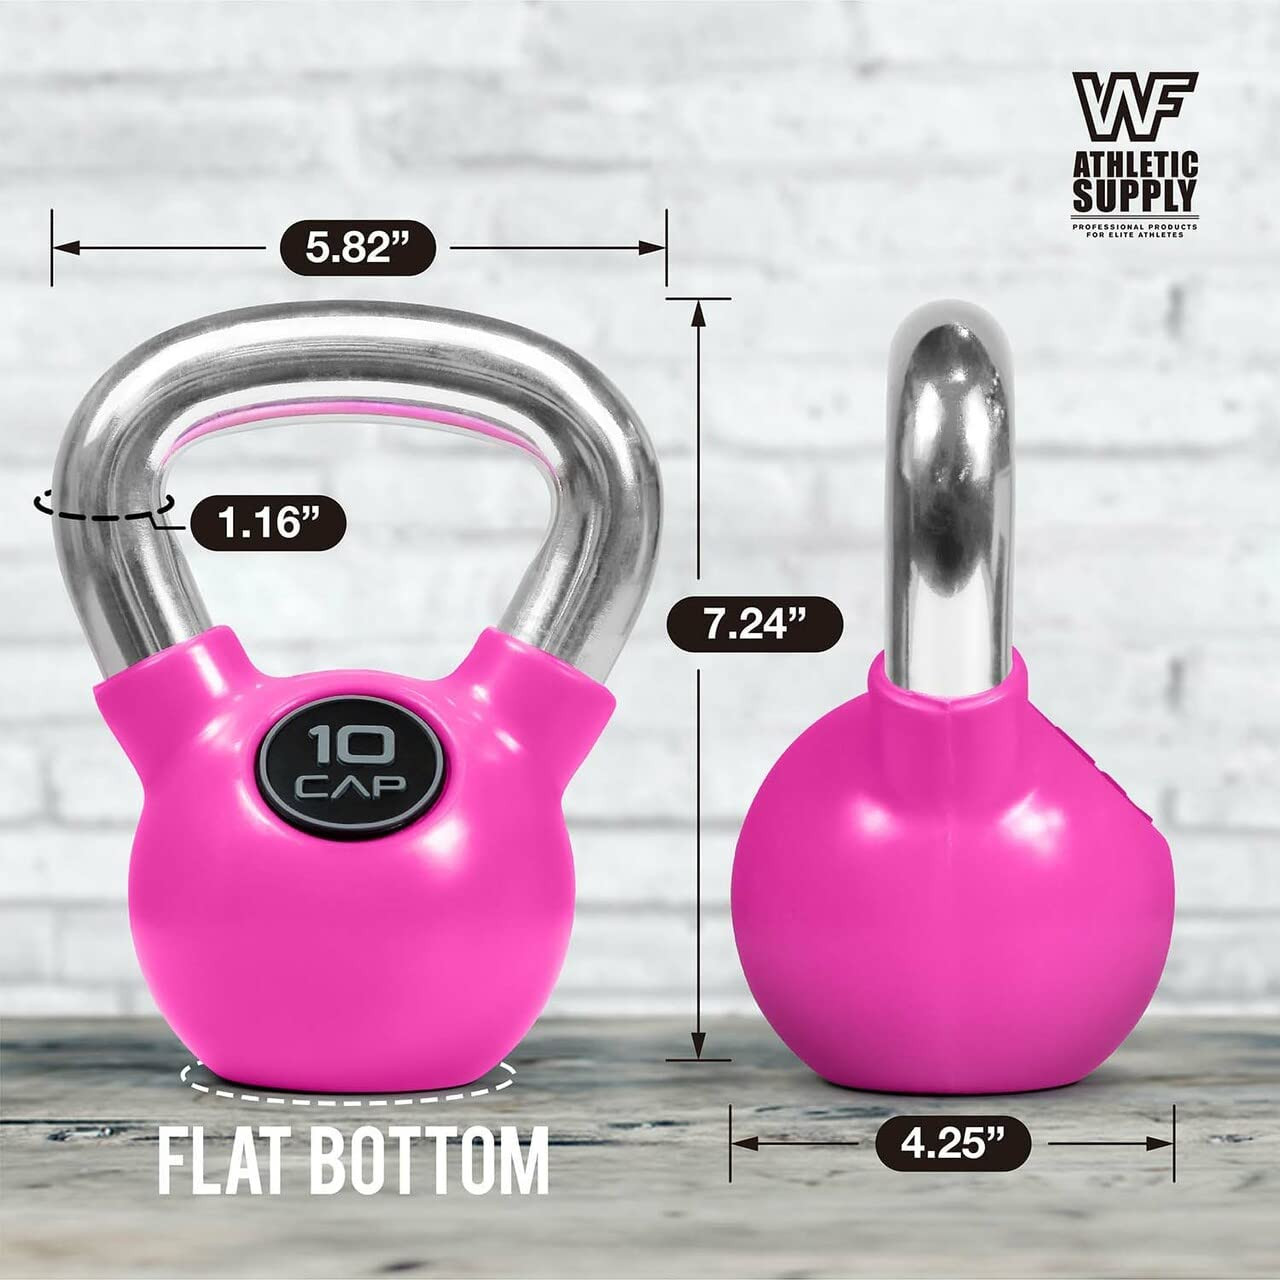 smidig Byblomst job Color Rubber Coated Kettlebell with Chrome Handle, Great for Cross  Training, Swings, Body Workout and Muscle Exercise - WF Athletic Supply